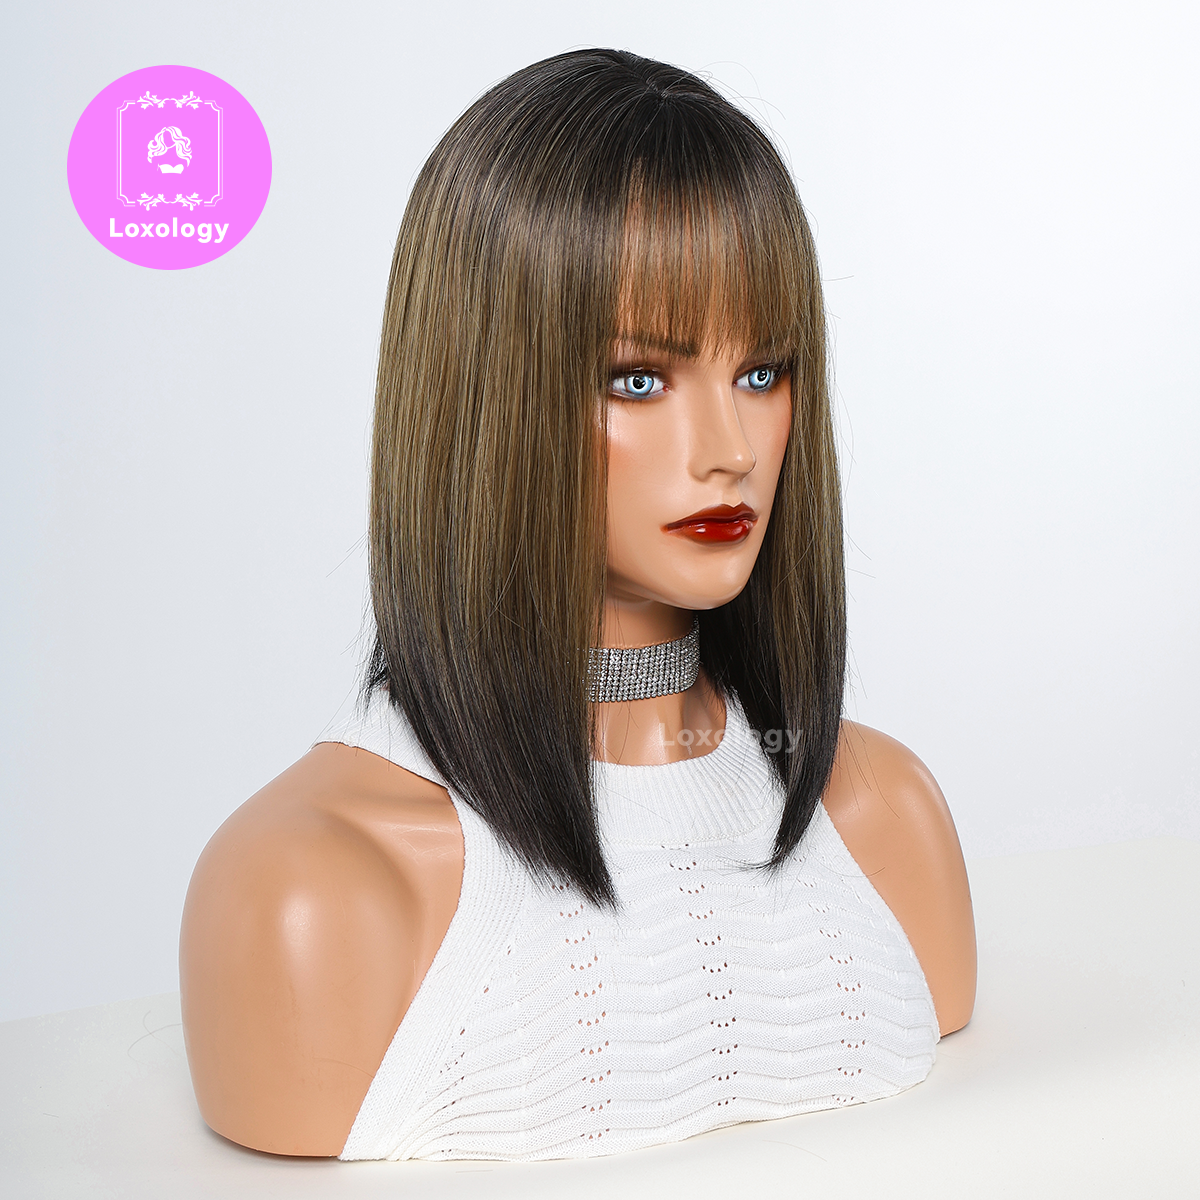 【Oona】Loxology | 14 Inches Long Straight Blonde Ombre Black Wigs Bangs Synthetic Wigs Women's Wigs for Daily